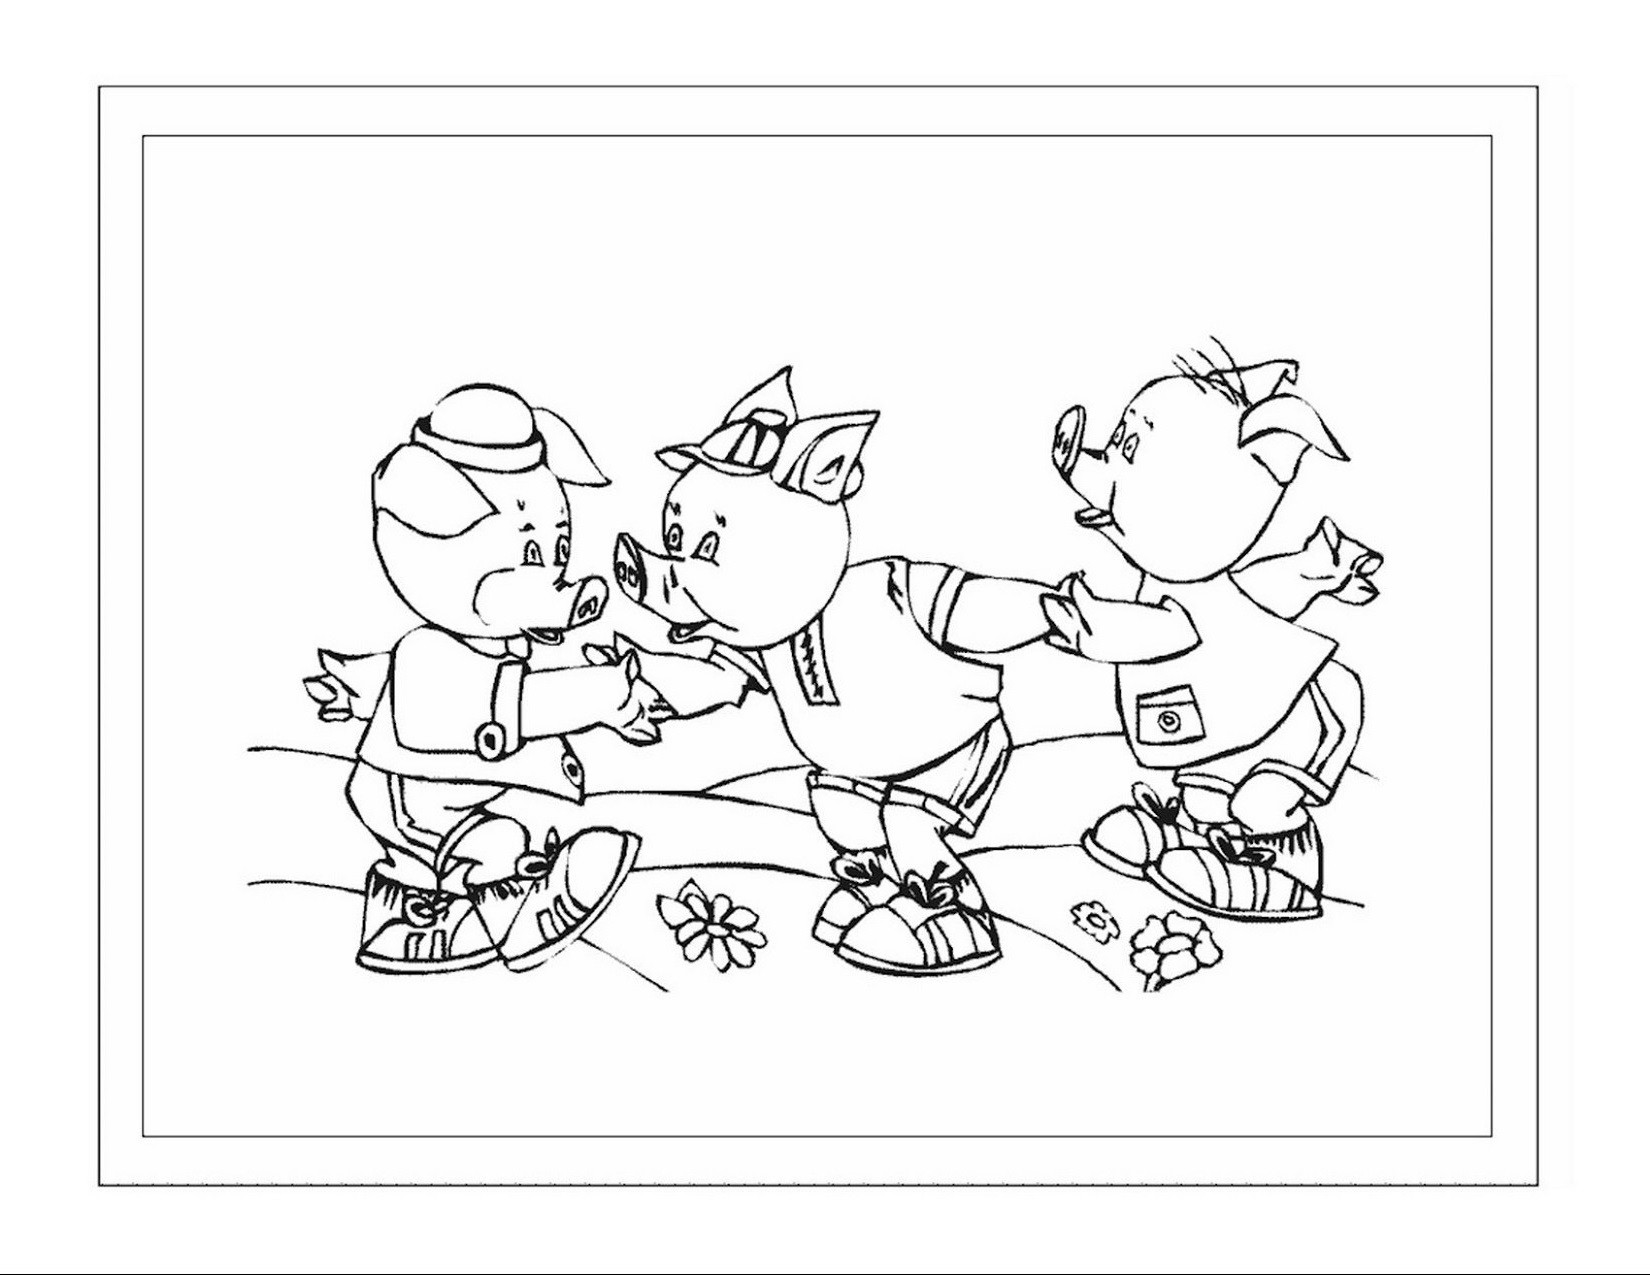 Preschool Coloring Sheets For The 3 Little Pigs Wolf
 Three Little Pigs Coloring Pages for Preschool